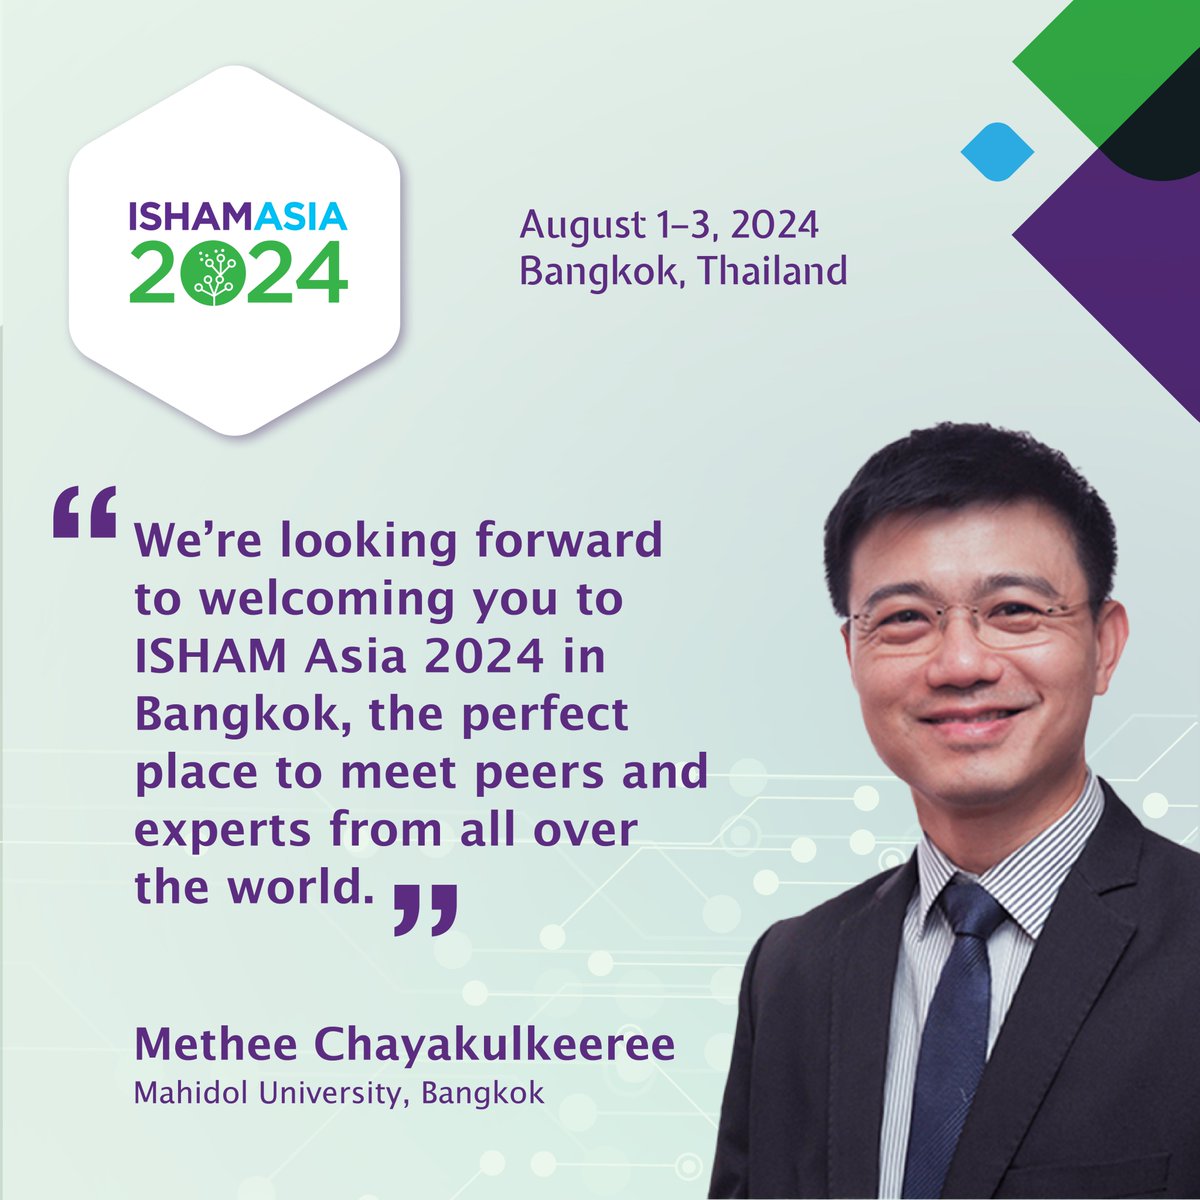 See what AFWG’s Methee Chayakulkeeree has to say about the #ISHAMAsia Congress—Advances in Medical Mycology from Laboratory to Clinic! Register now: bit.ly/4bjo8pt. #medicalmycology #thinkfungus #infectiousdiseases #microbiology